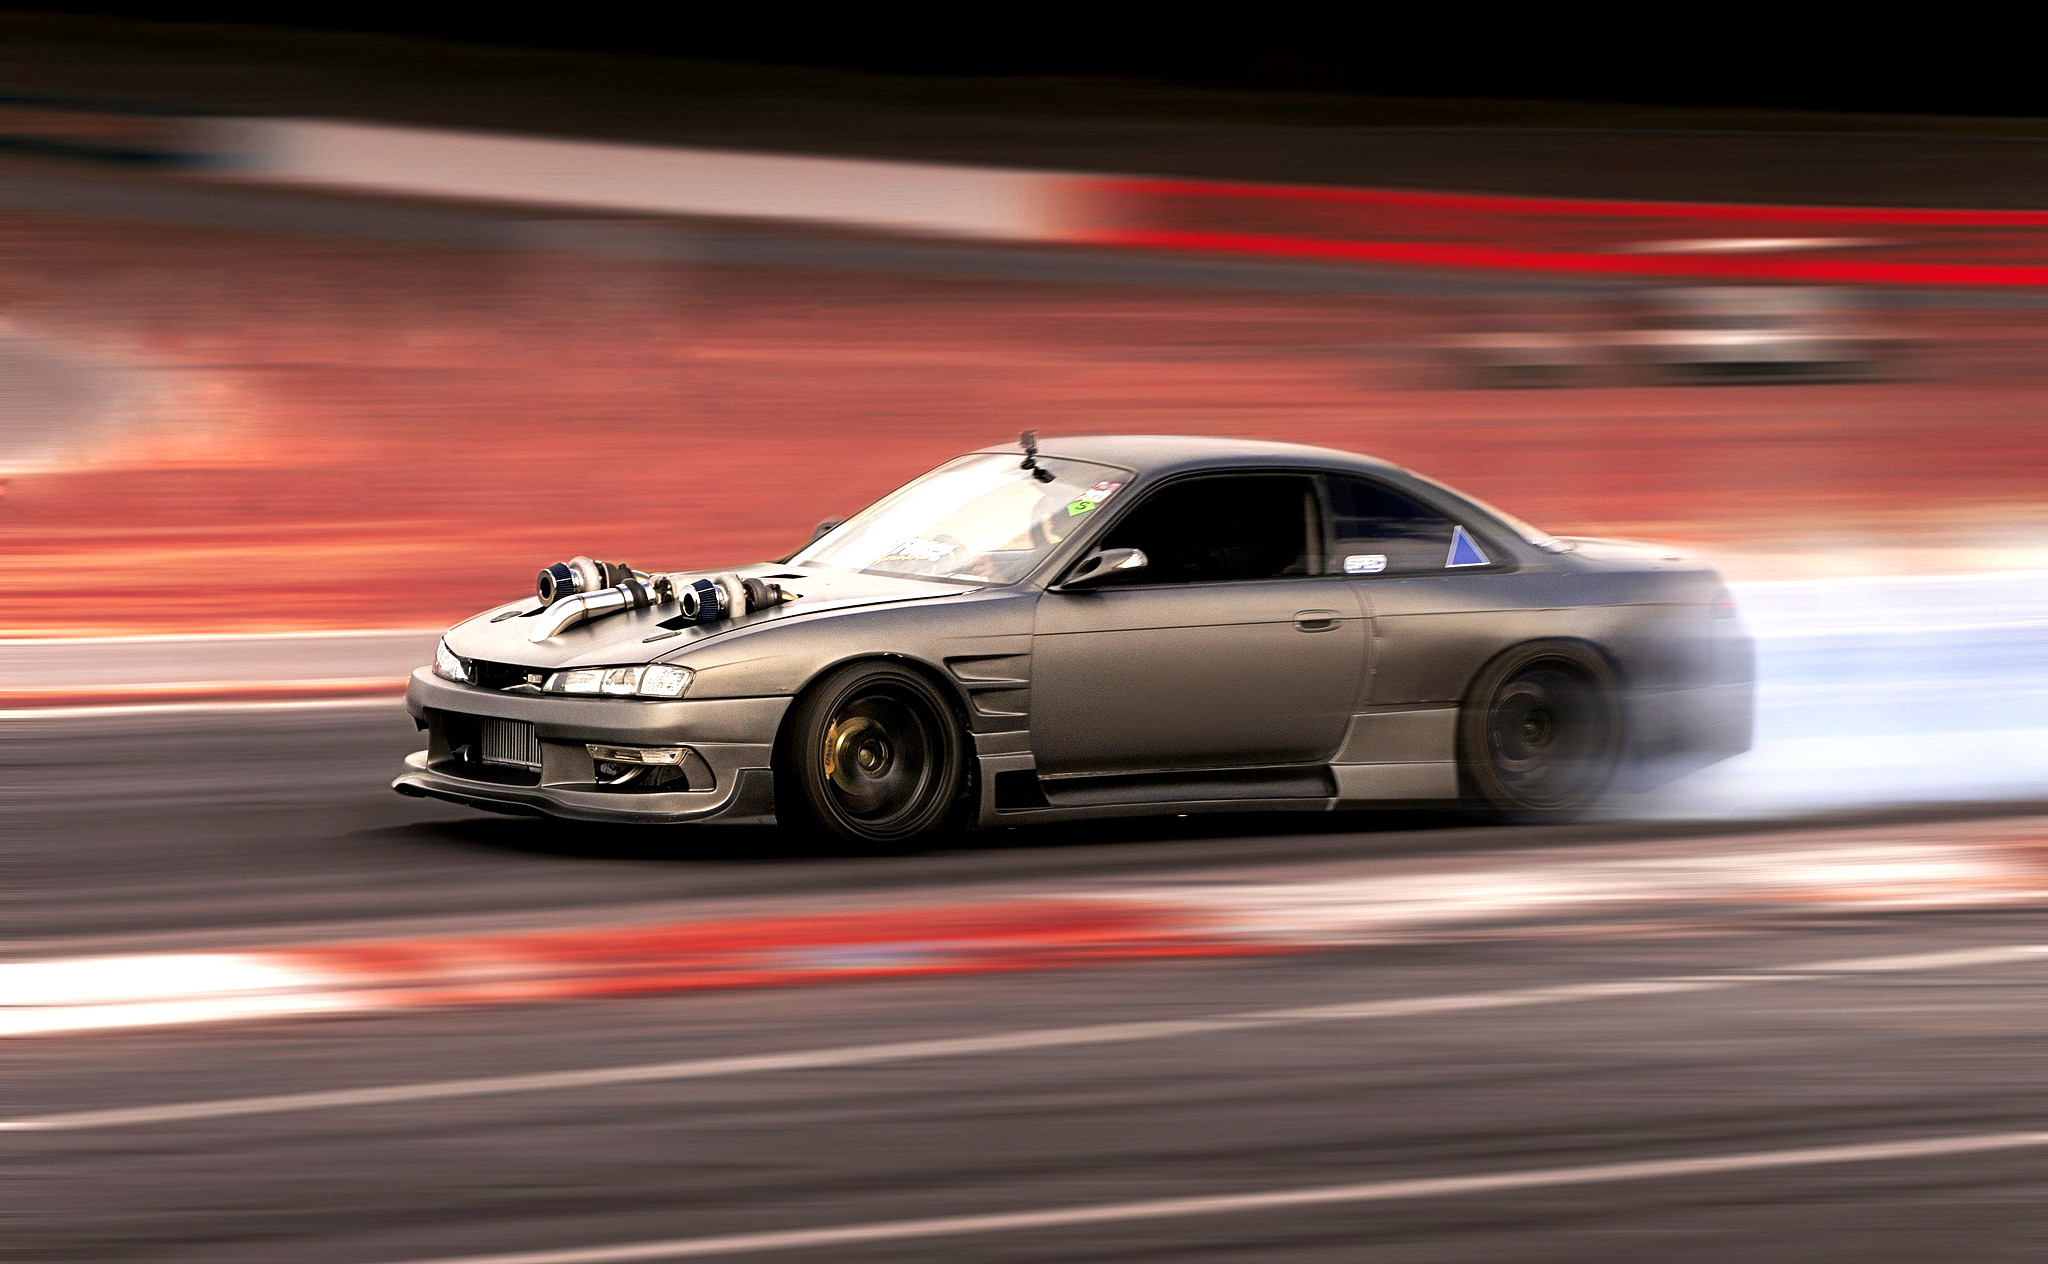 2048x1264 Drag Car Wallpapers Page 1. Nissan Silvia S14 Computer Wallpapers, Desktop  Backgrounds